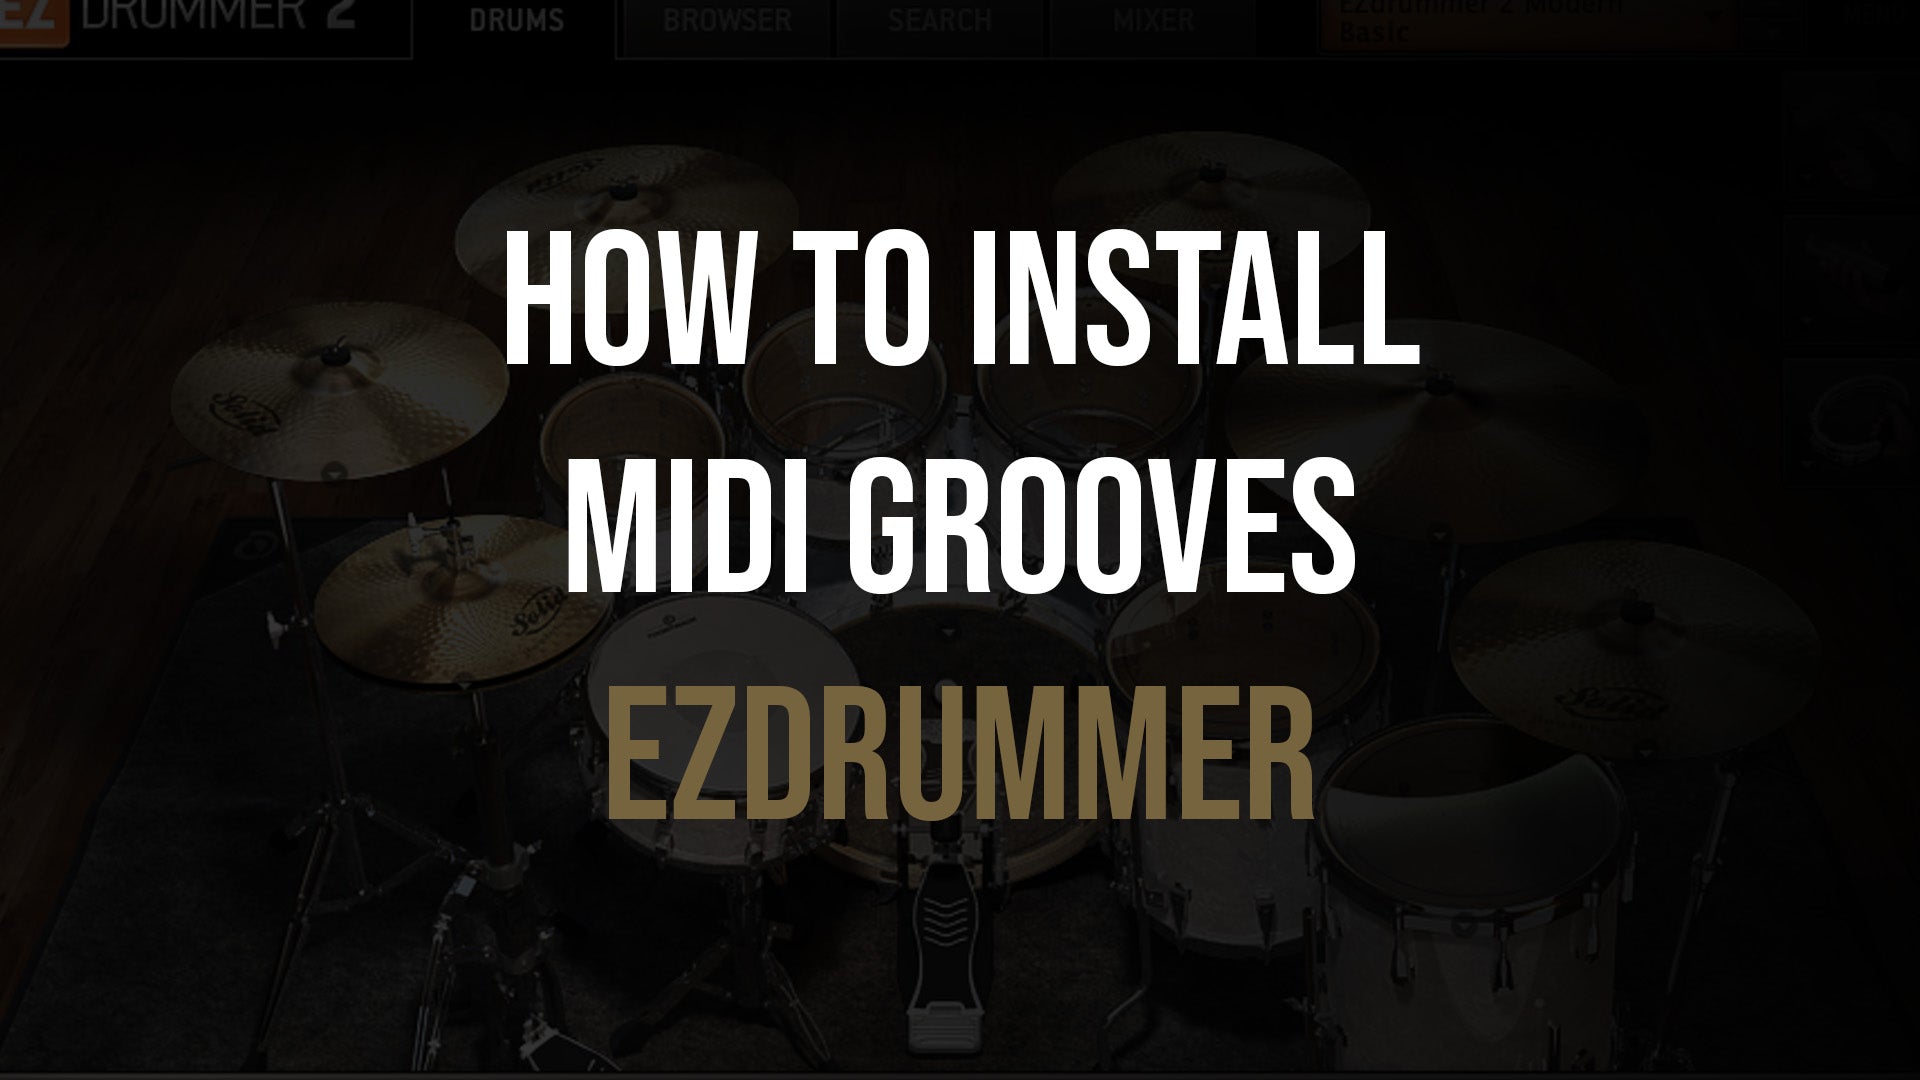 How to install Loudstakk MIDI Grooves into EzDrummer